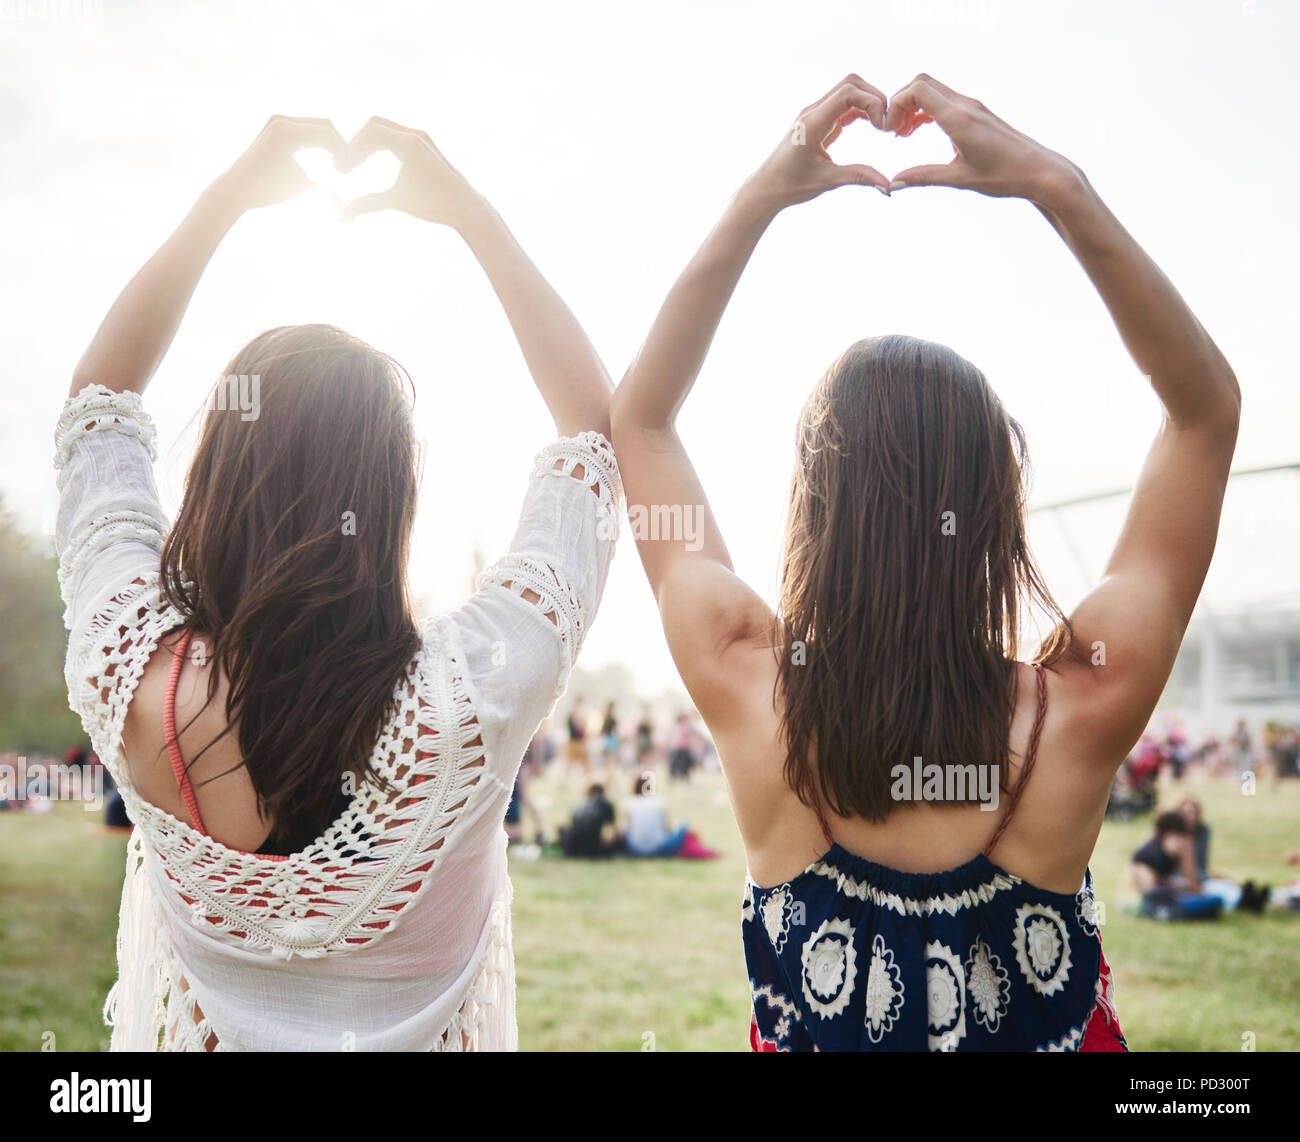 Friends dancing with arms raised in music festival Stock Photo